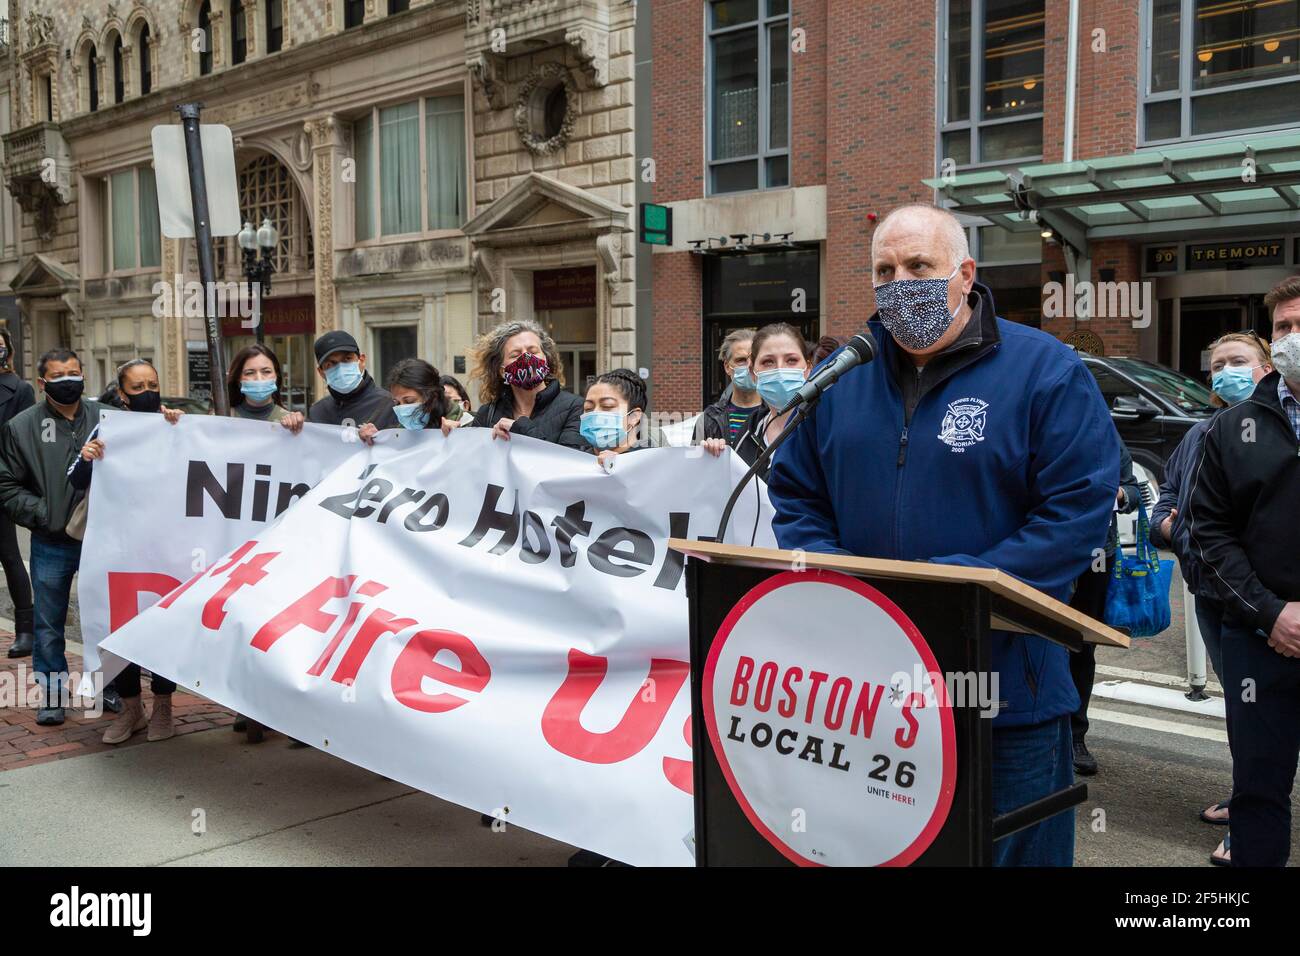 March 26, 2021. Boston, MA. Boston City Councilor Ed Flynn Recently fired Nine Zero Hotel workers gathered at the hotel to demand their jobs back afte Stock Photo